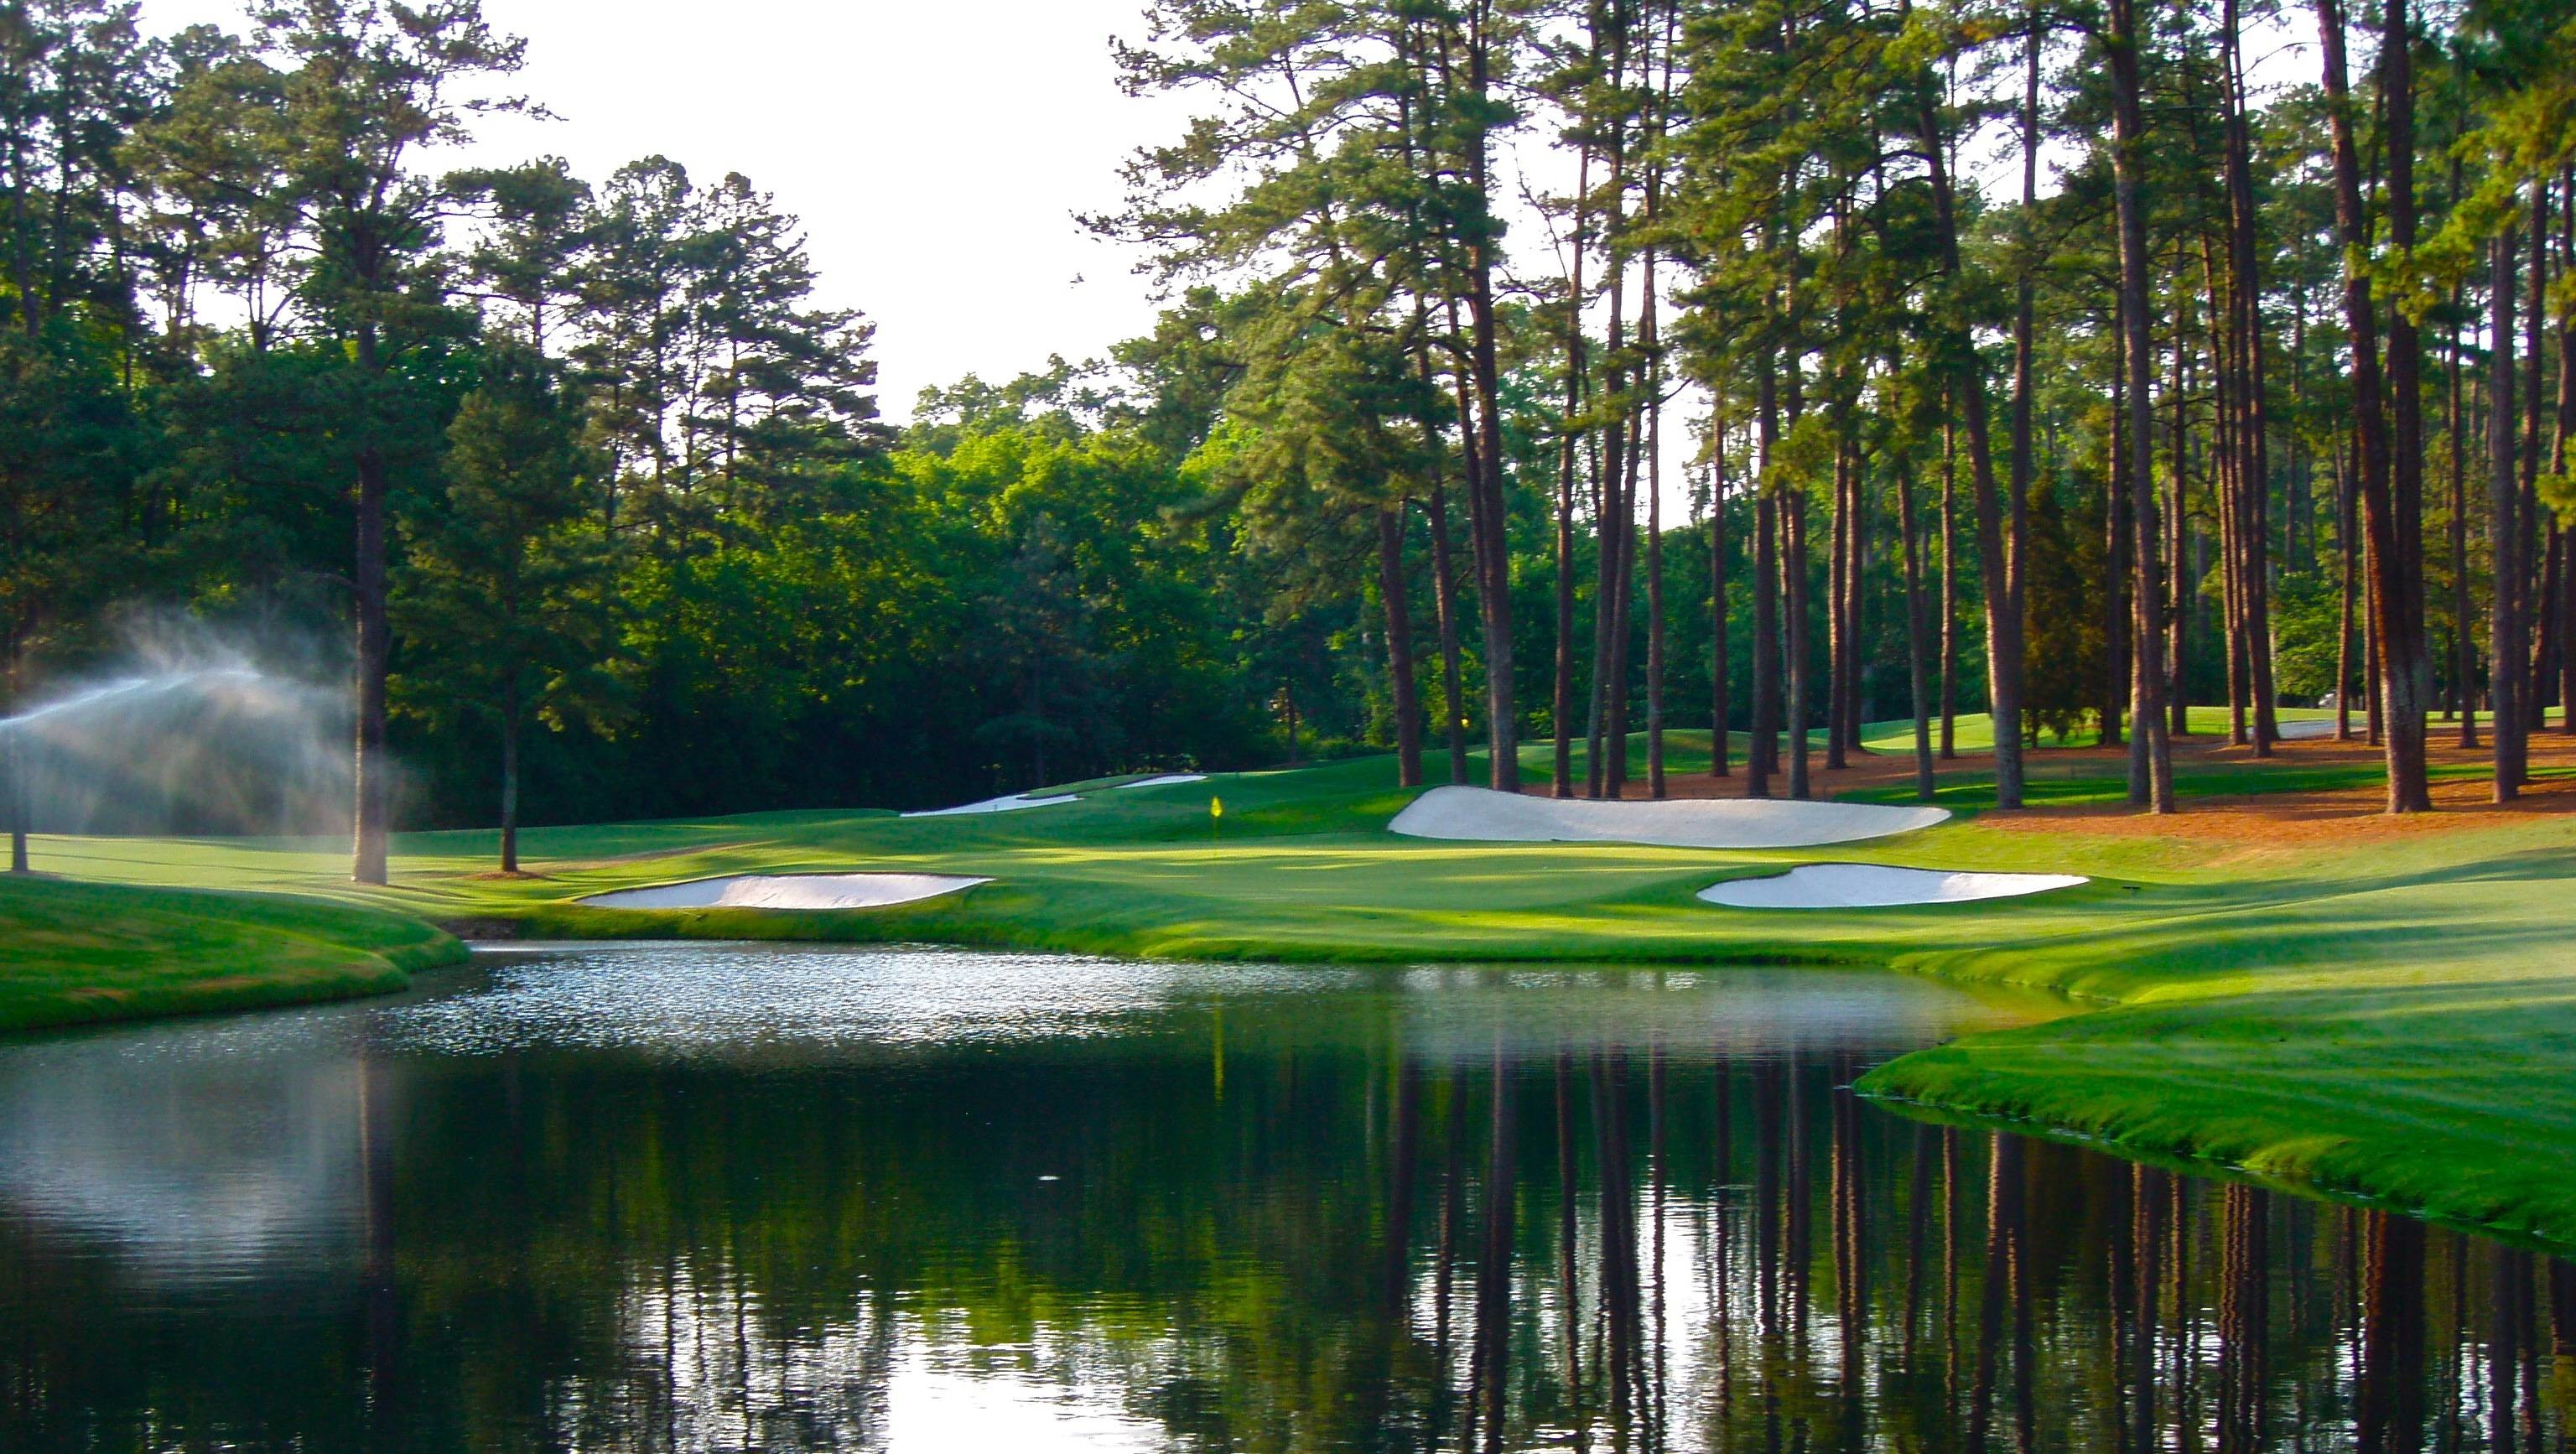 How And When To Watch The 2019 Masters Tournament On CBS 